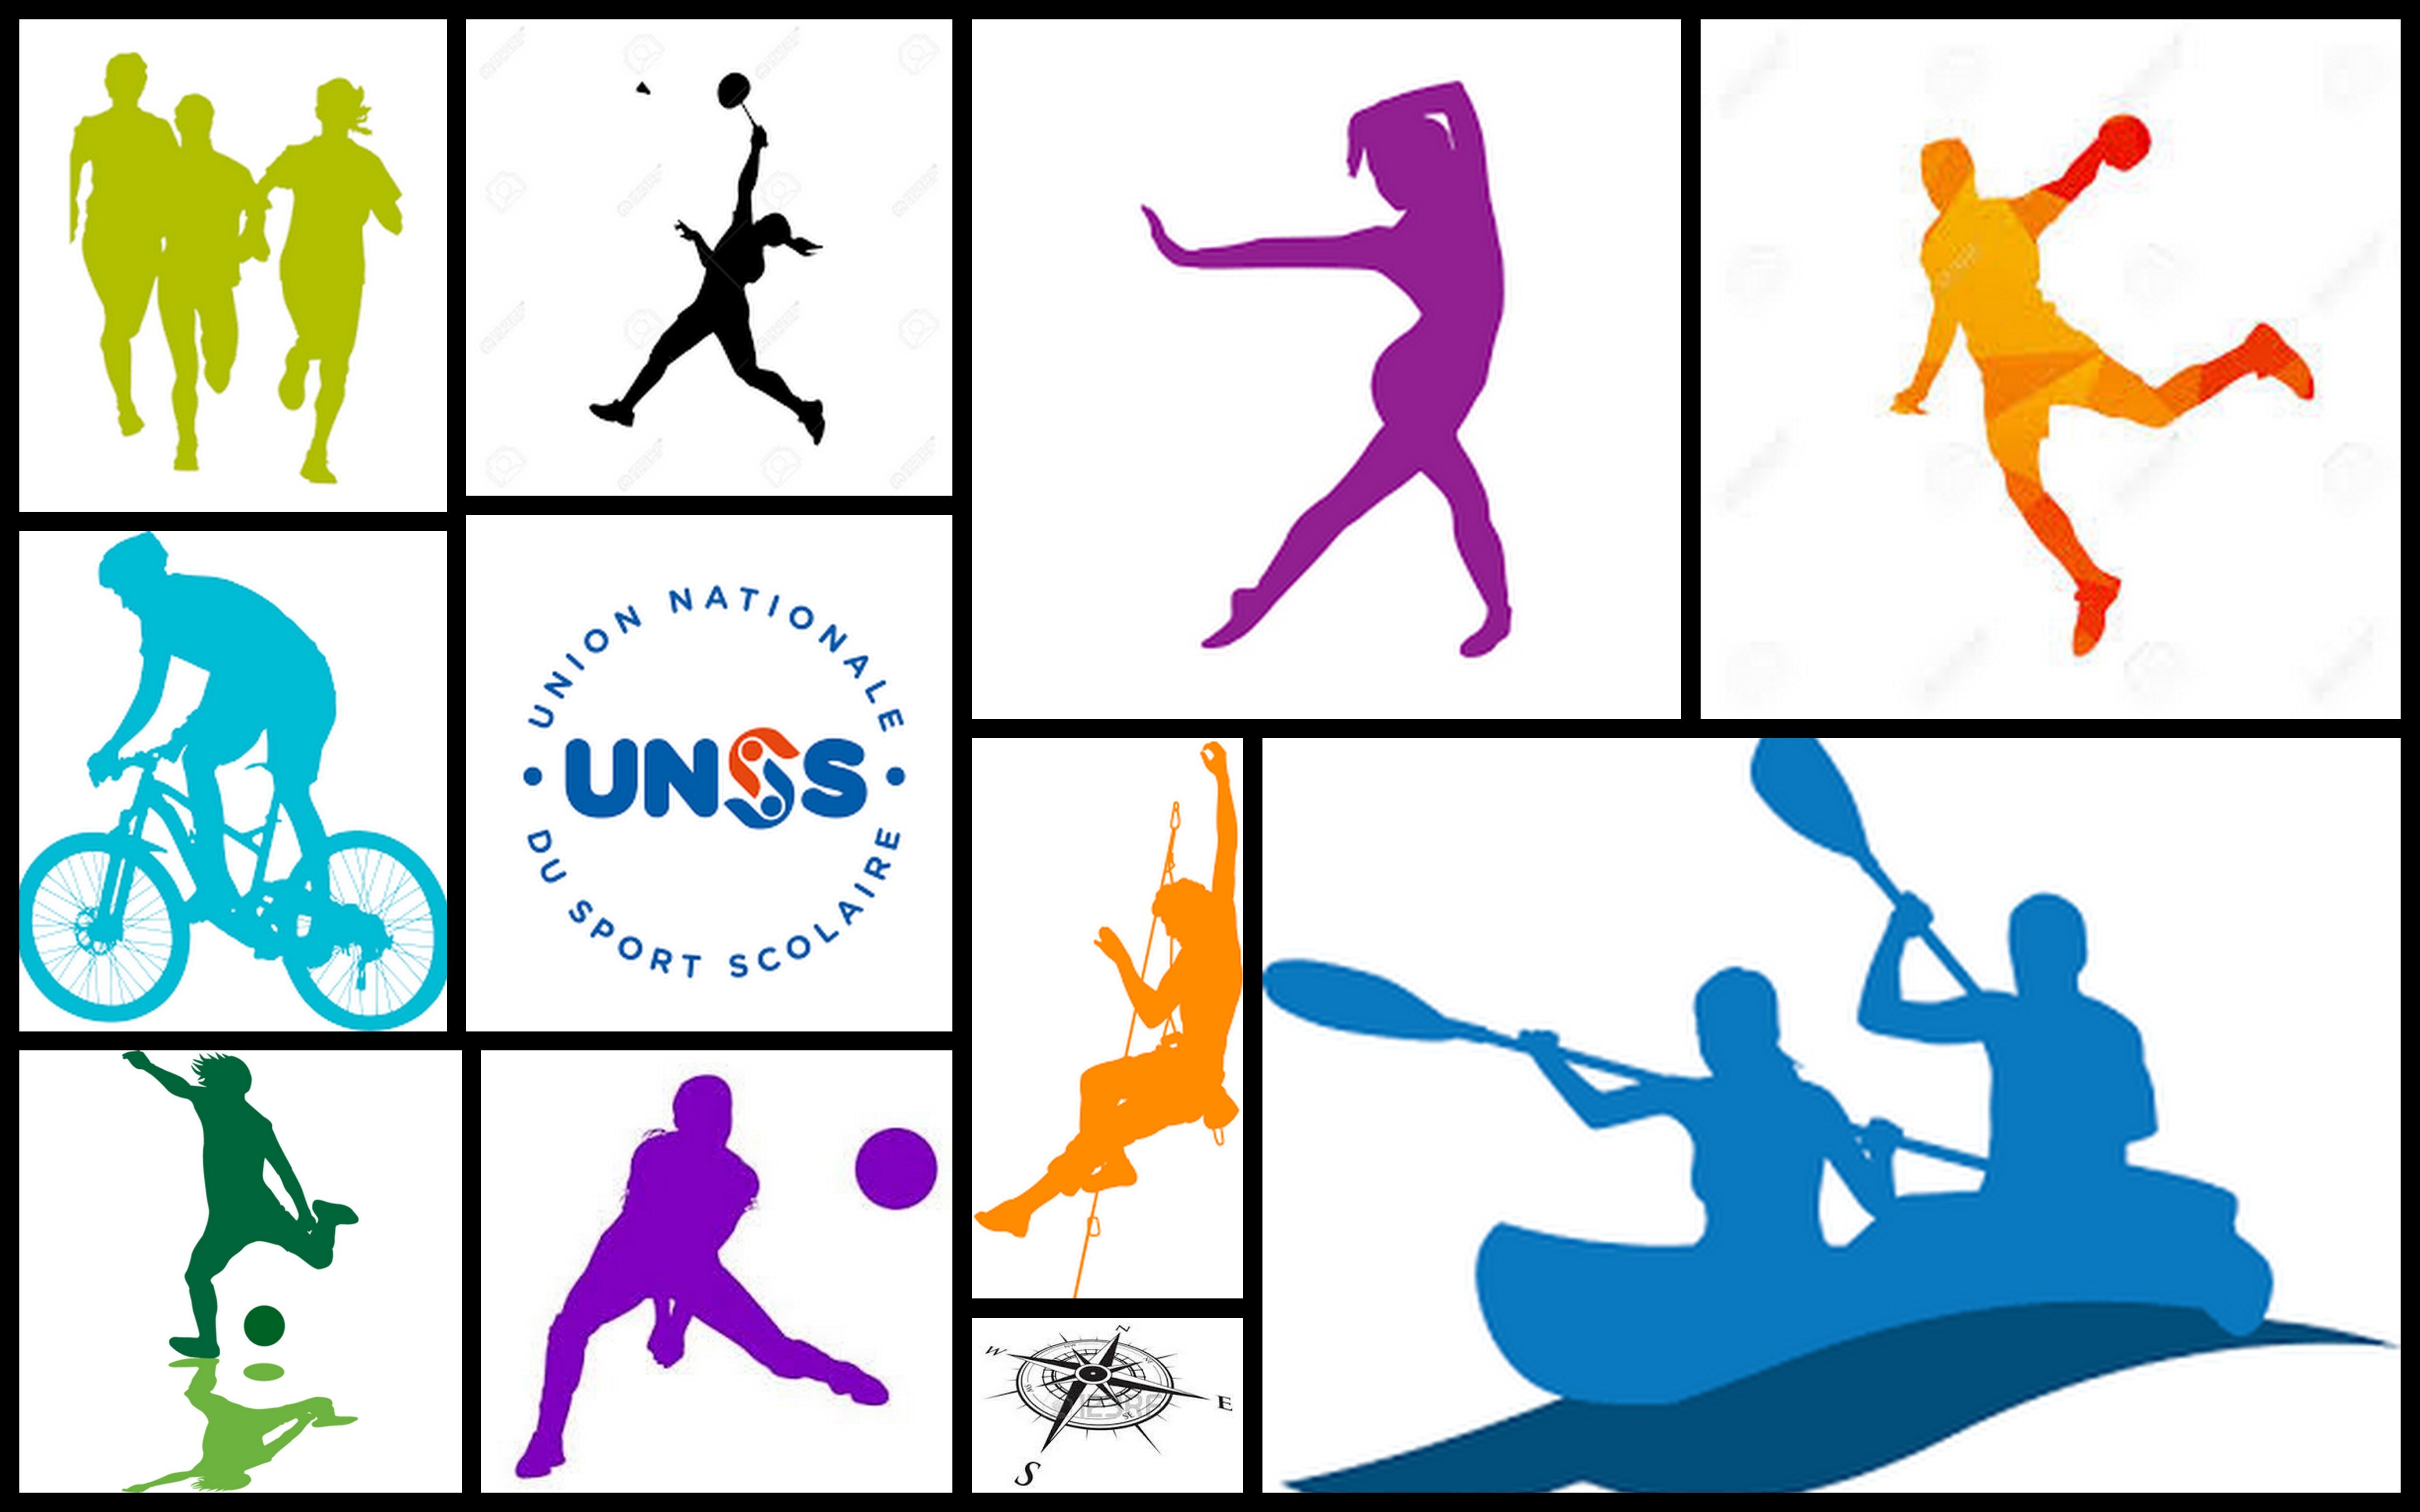 logo AS UNSS